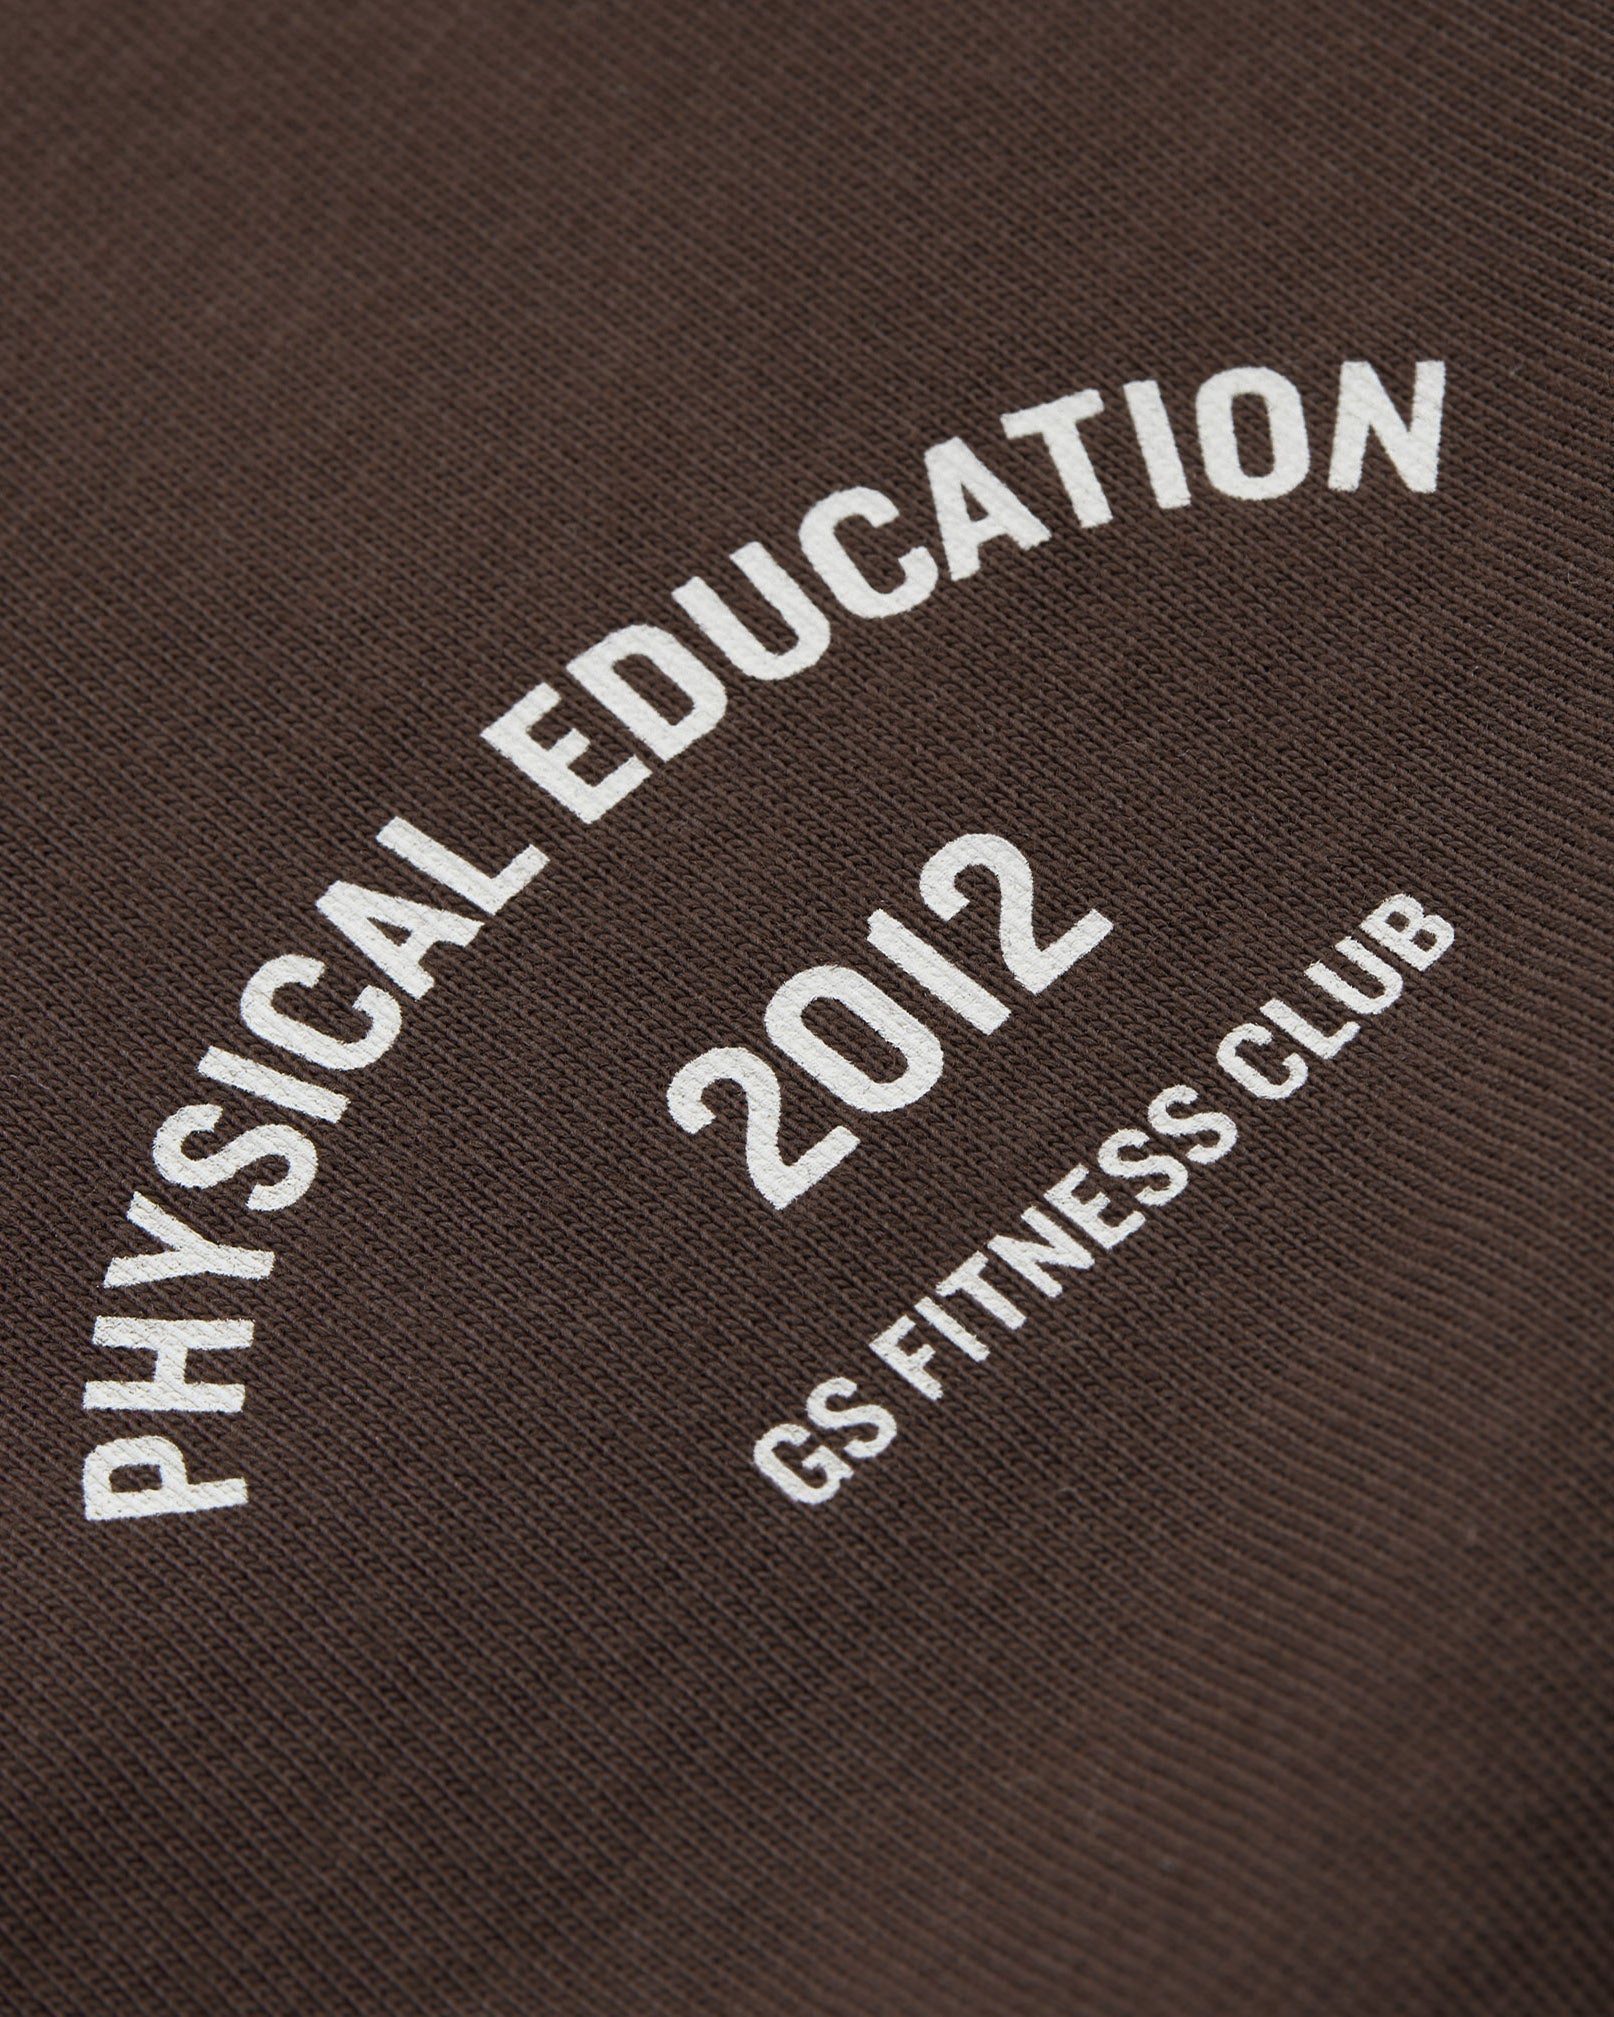 Phys Ed Graphic T-Shirt in Archive Brown - view 5